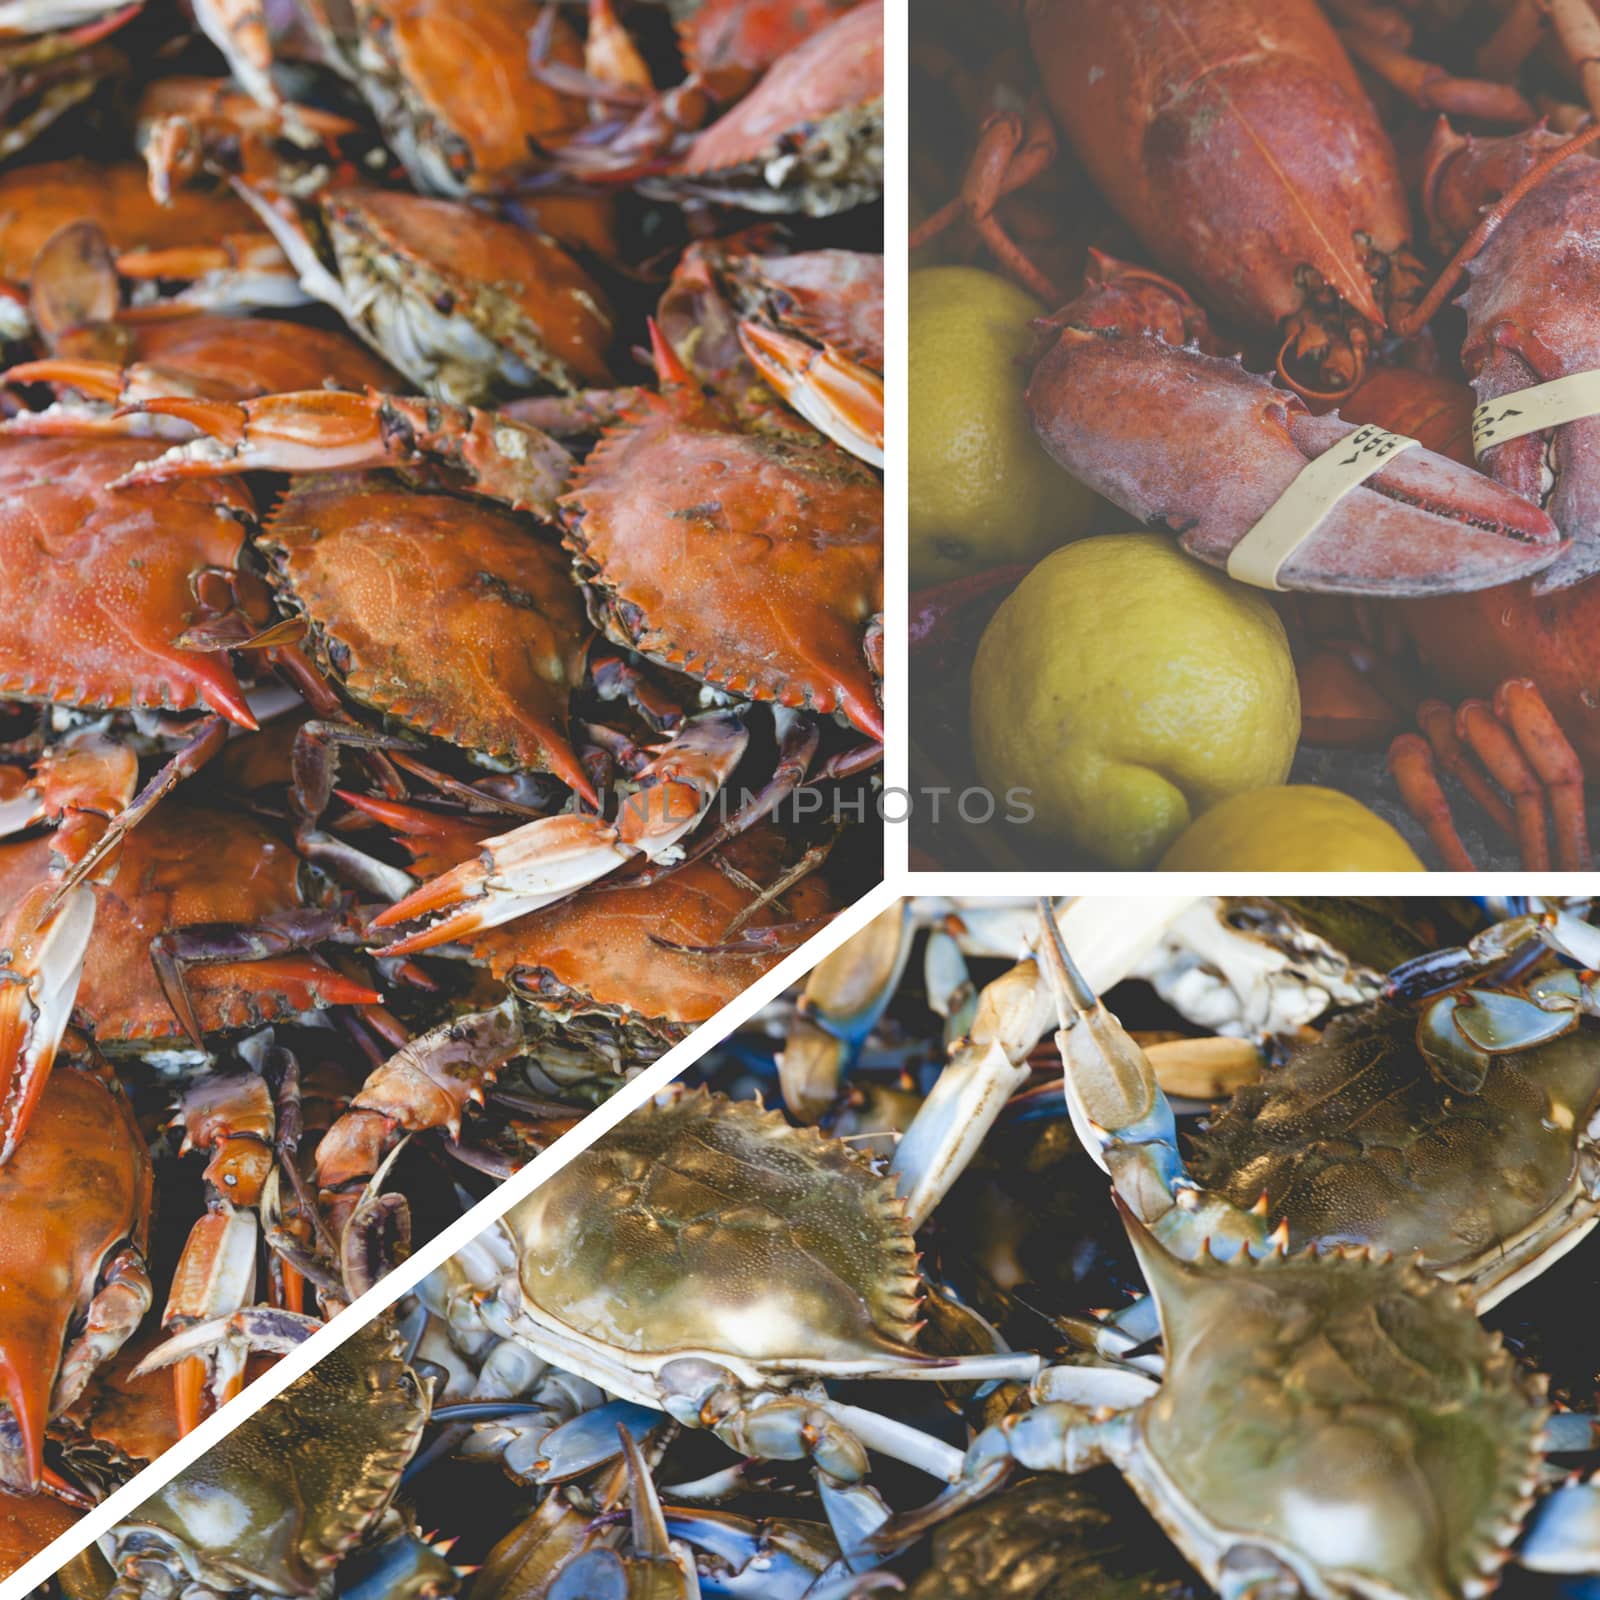 Collage of Crabs by mariusz_prusaczyk